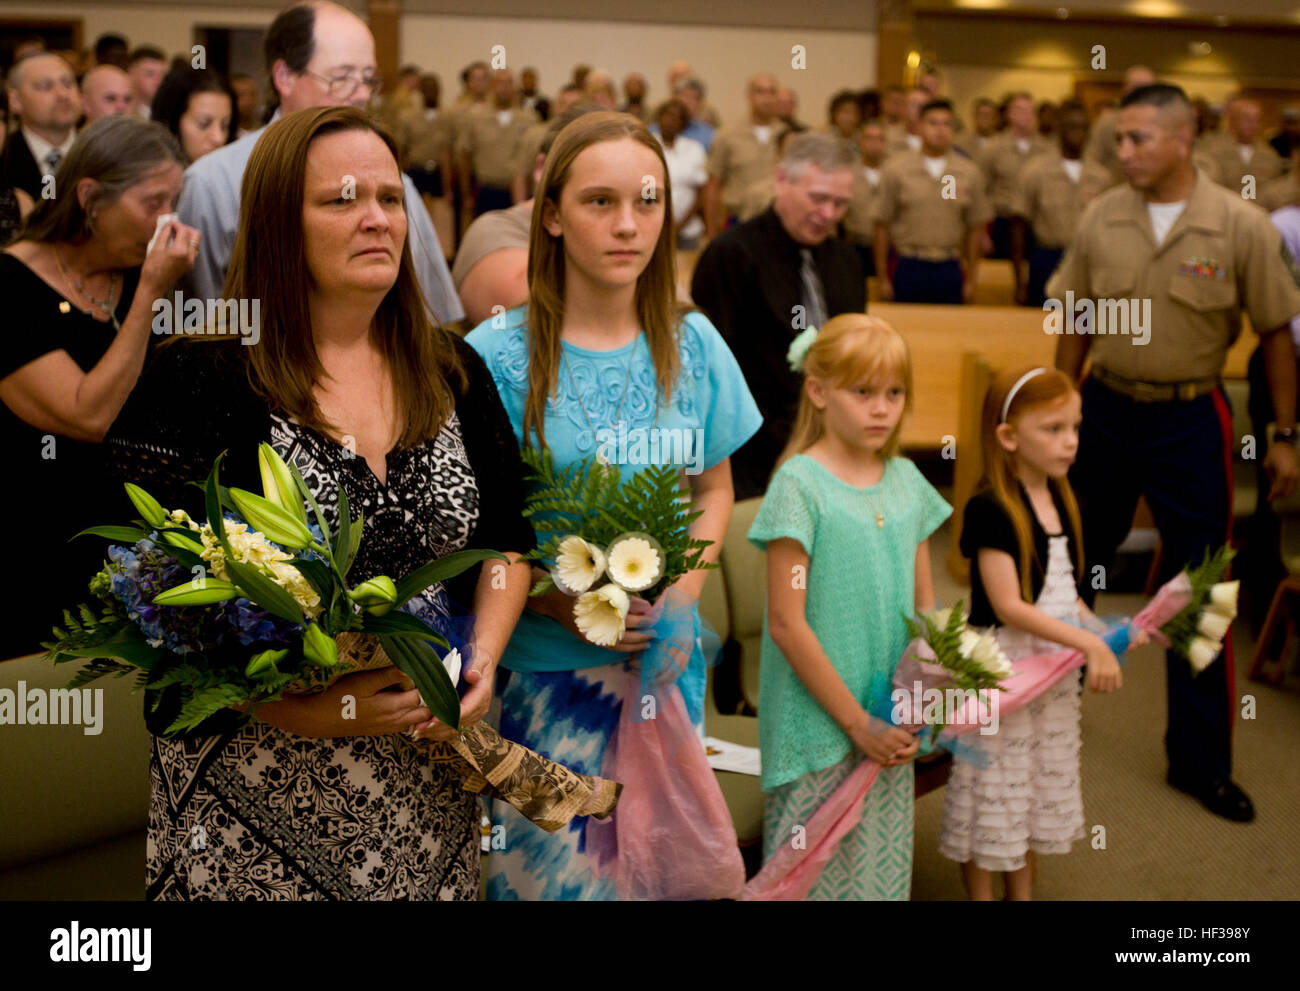 Monica Jones and her daughters Isabella, Brianna, and Makayla, the immediate family of Gunnery Sgt. Eugene E. Jones, U.S. Marine Corps (deceased) await the beginning of the Memorial Service being held for GySgt Jones at the base Chapel aboard Marine Corps Base Hawaii, Kaneohe Bay, May 4, 2015. GySgt. Jones passed away on Wednesday, April 29. 2015 at the age of 41. (U.S. Marine Corps photo by Cpl. Ricky S. Gomez/Released) Gunnery Sergeant Eugene E. Jones Memorial Service 140417-M-ZQ619-010 Stock Photo